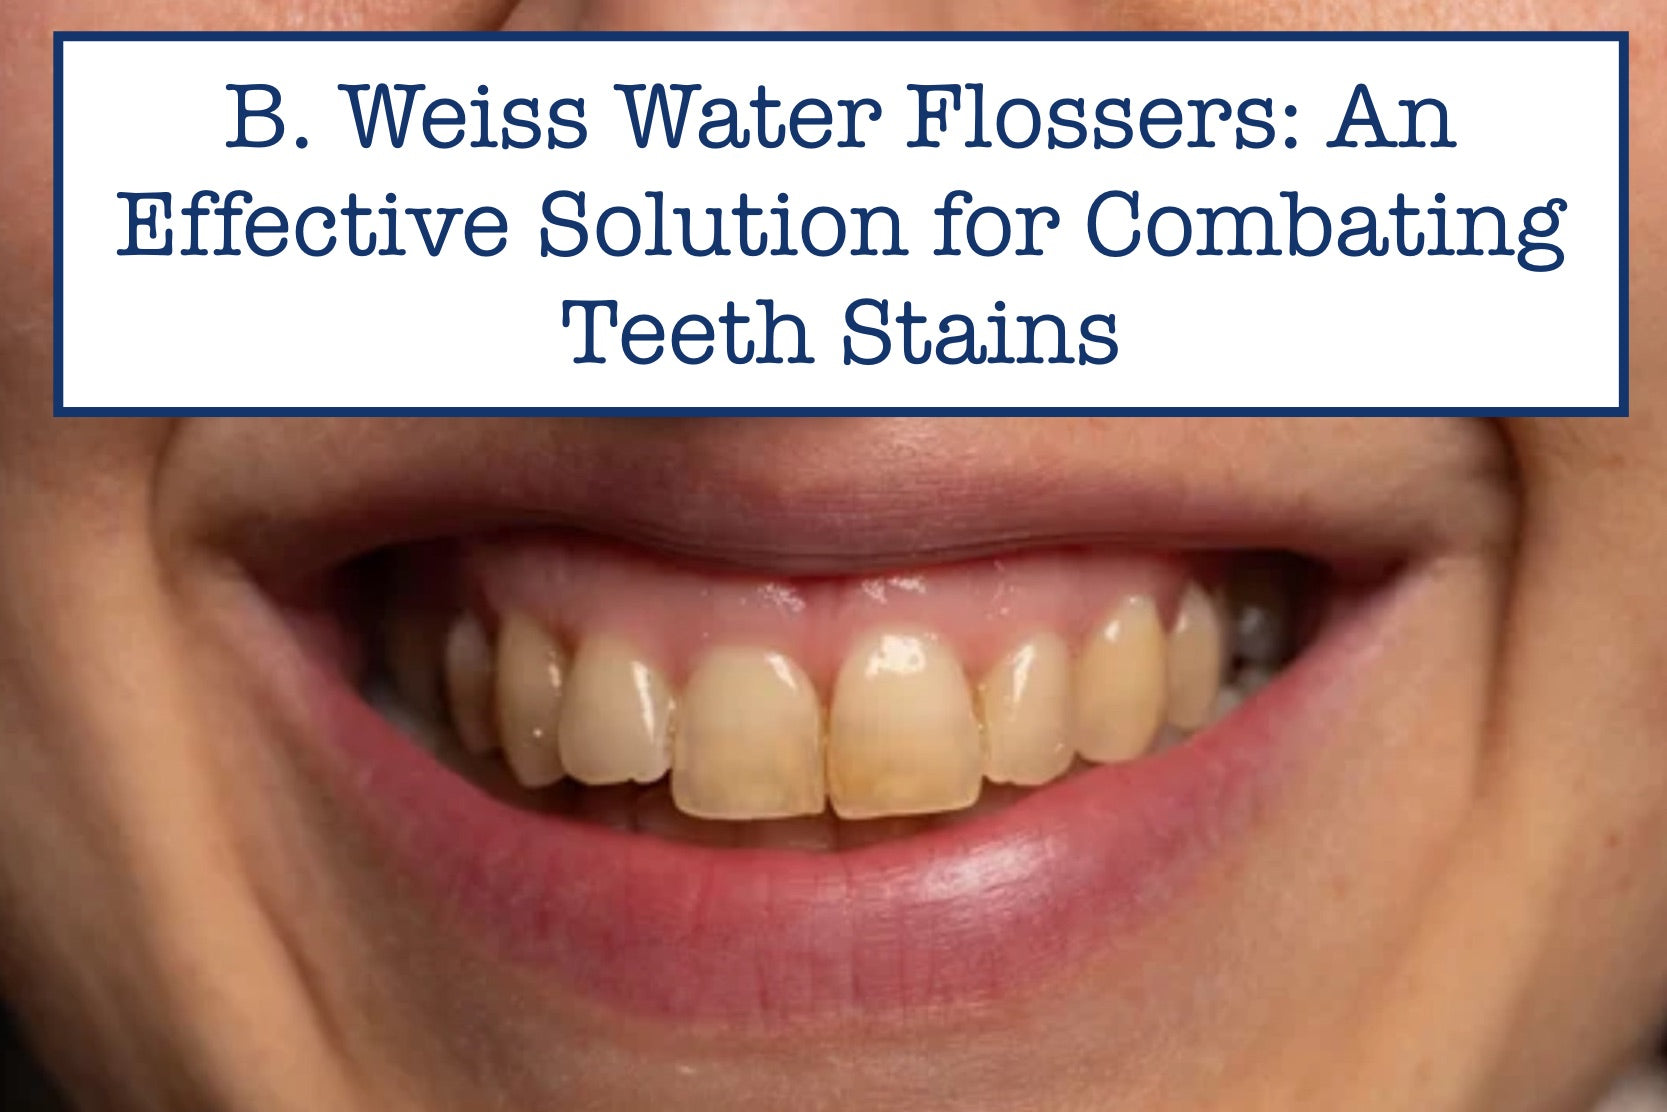 B. Weiss Water Flossers: An Effective Solution for Combating Teeth Stains